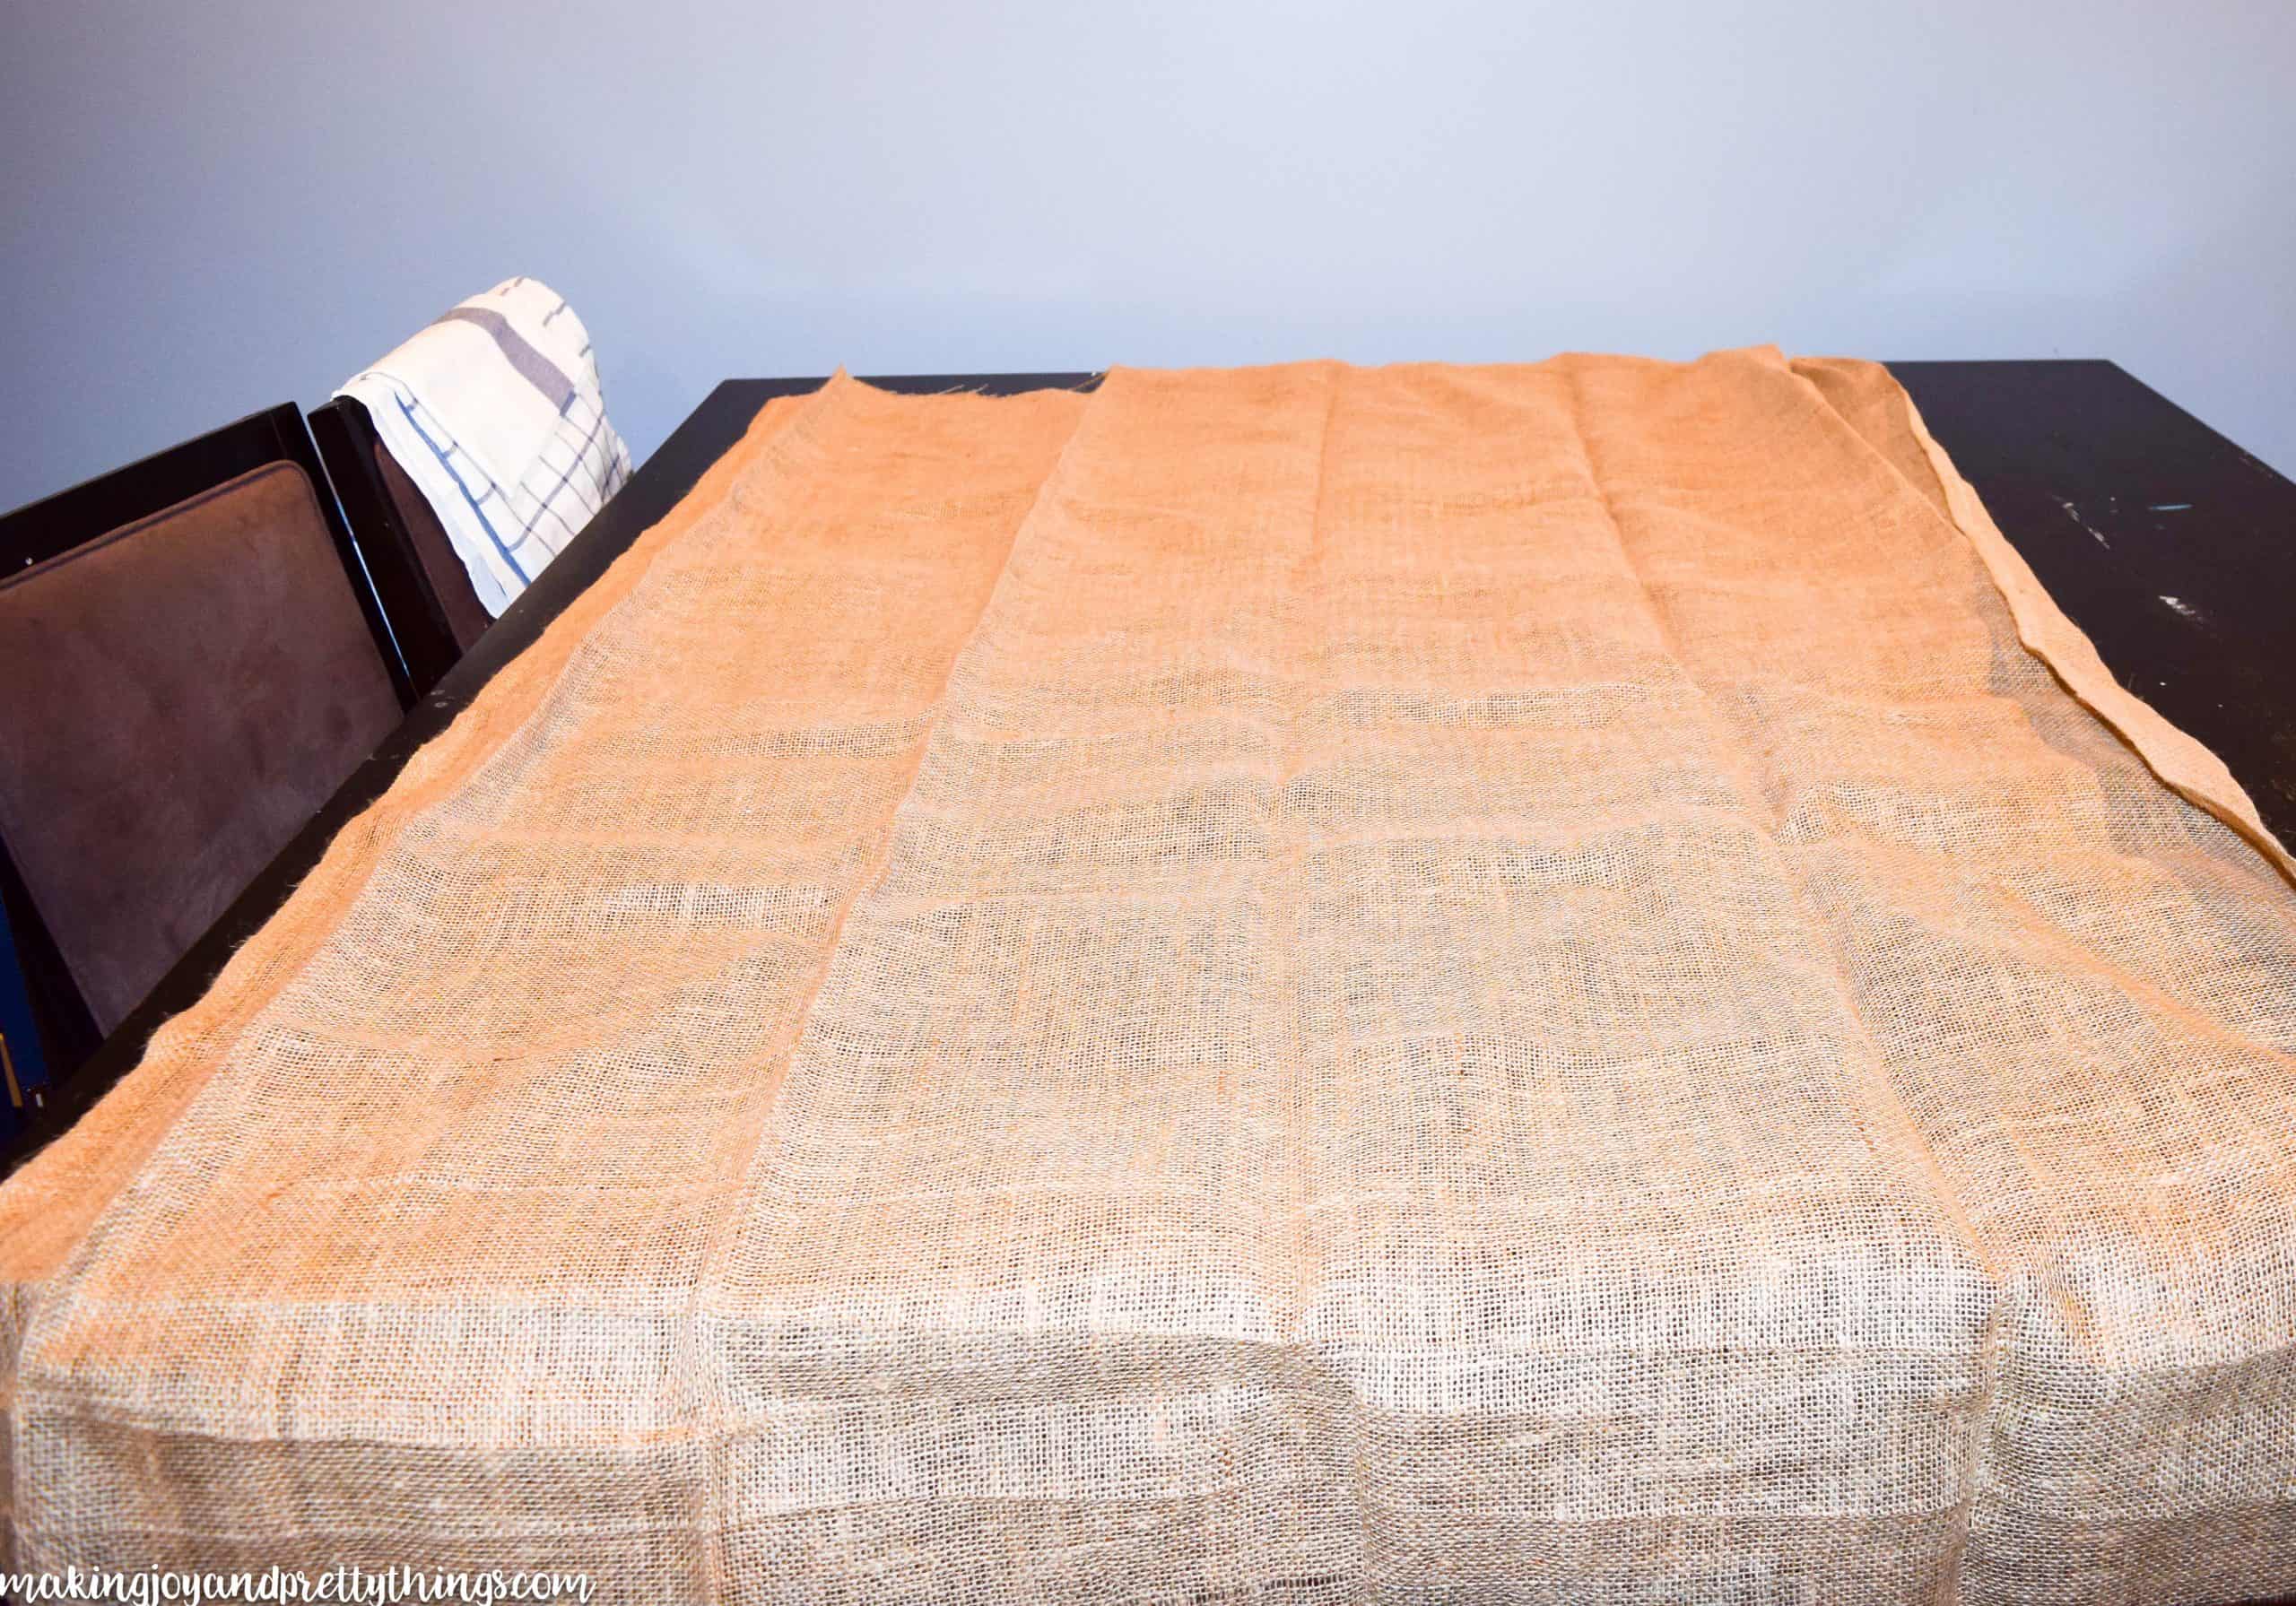 A large sheet of burlap fabric is laid out on a black table. The burlap has creases where it was previously folded.